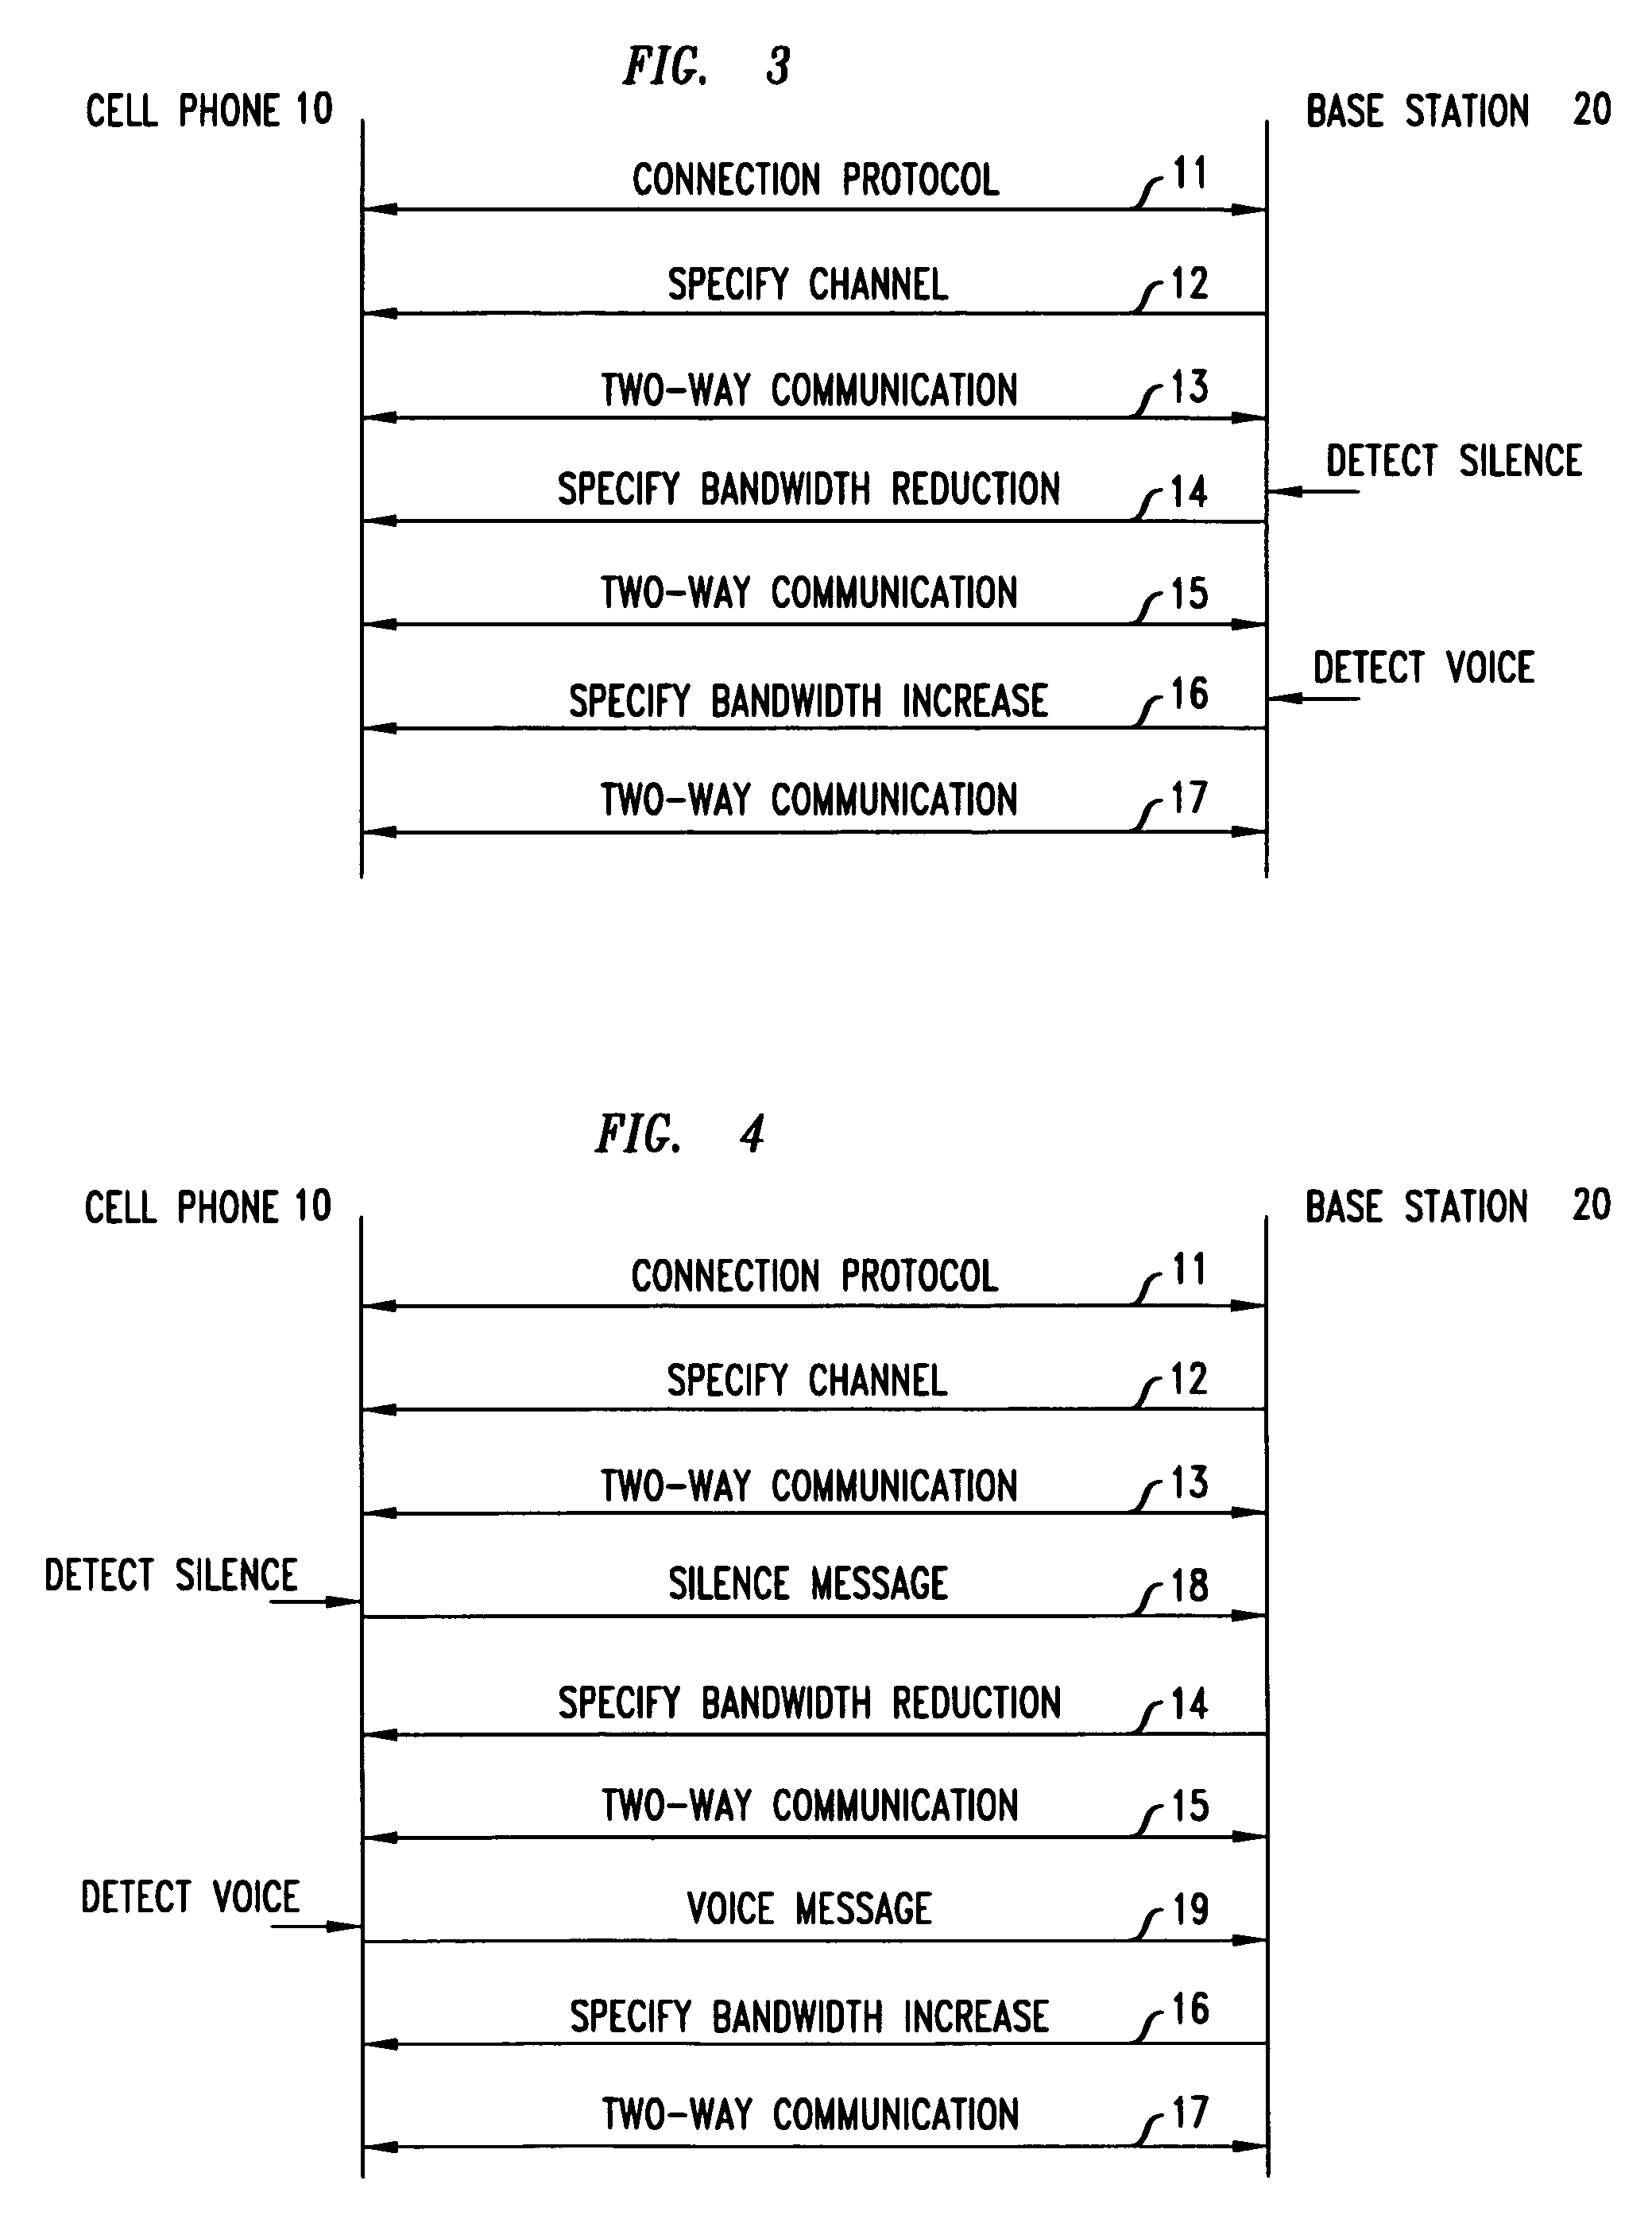 Multiple-access scheme for packet voice that uses voice activity detection